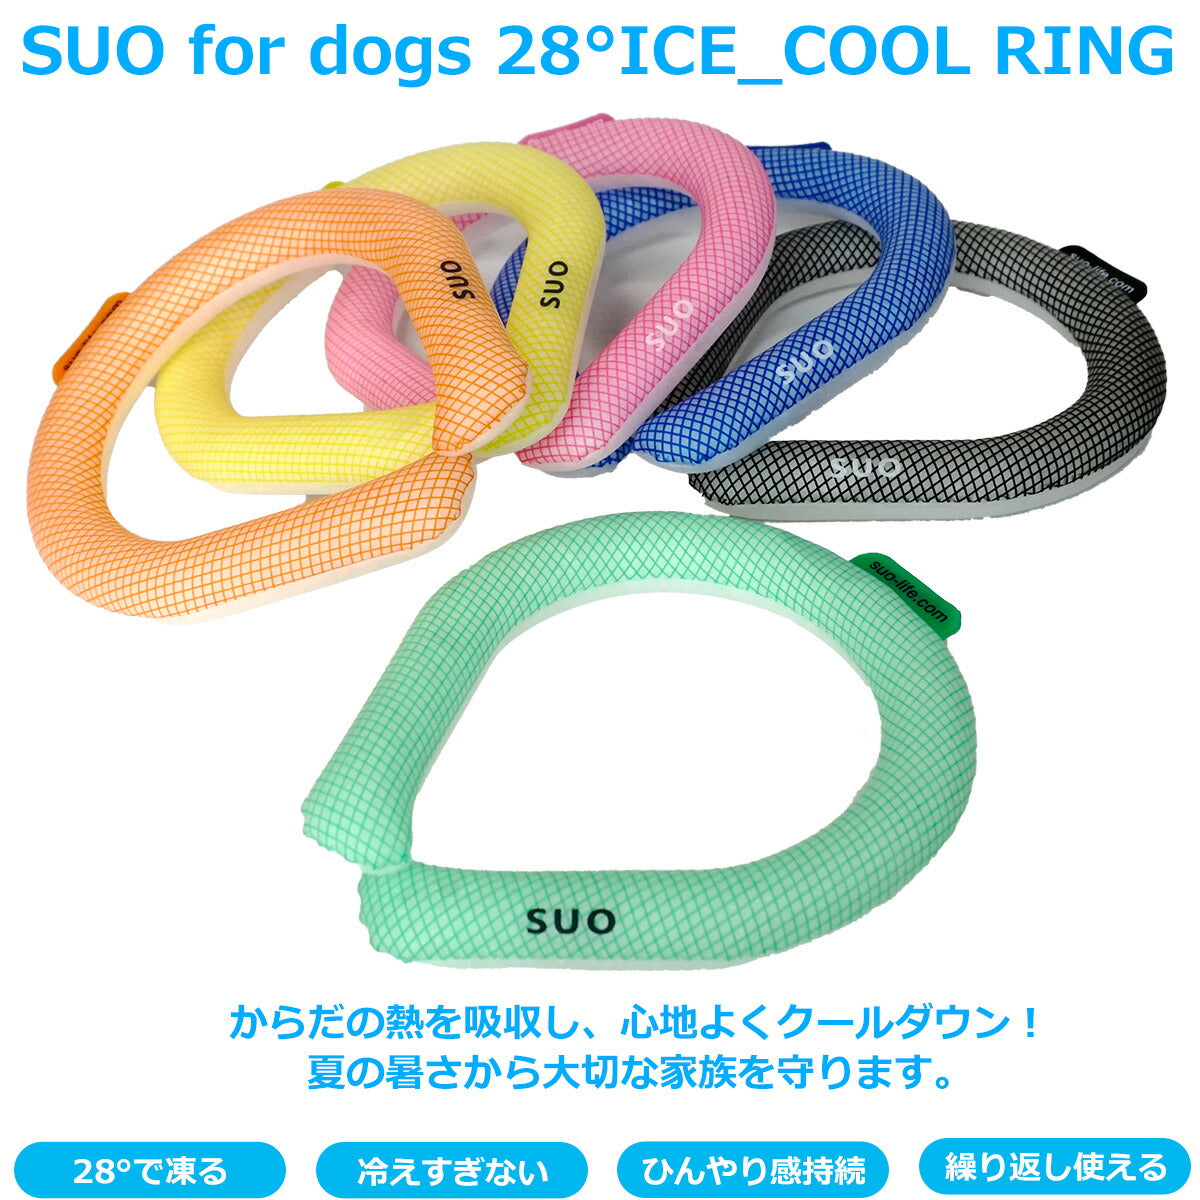 SUO for dogs 28°ICE SUOリング ボタンなし SS ブラック 熱中症対策グッズ 暑さ対策 ひんやり 首 冷感 犬 大人 子供